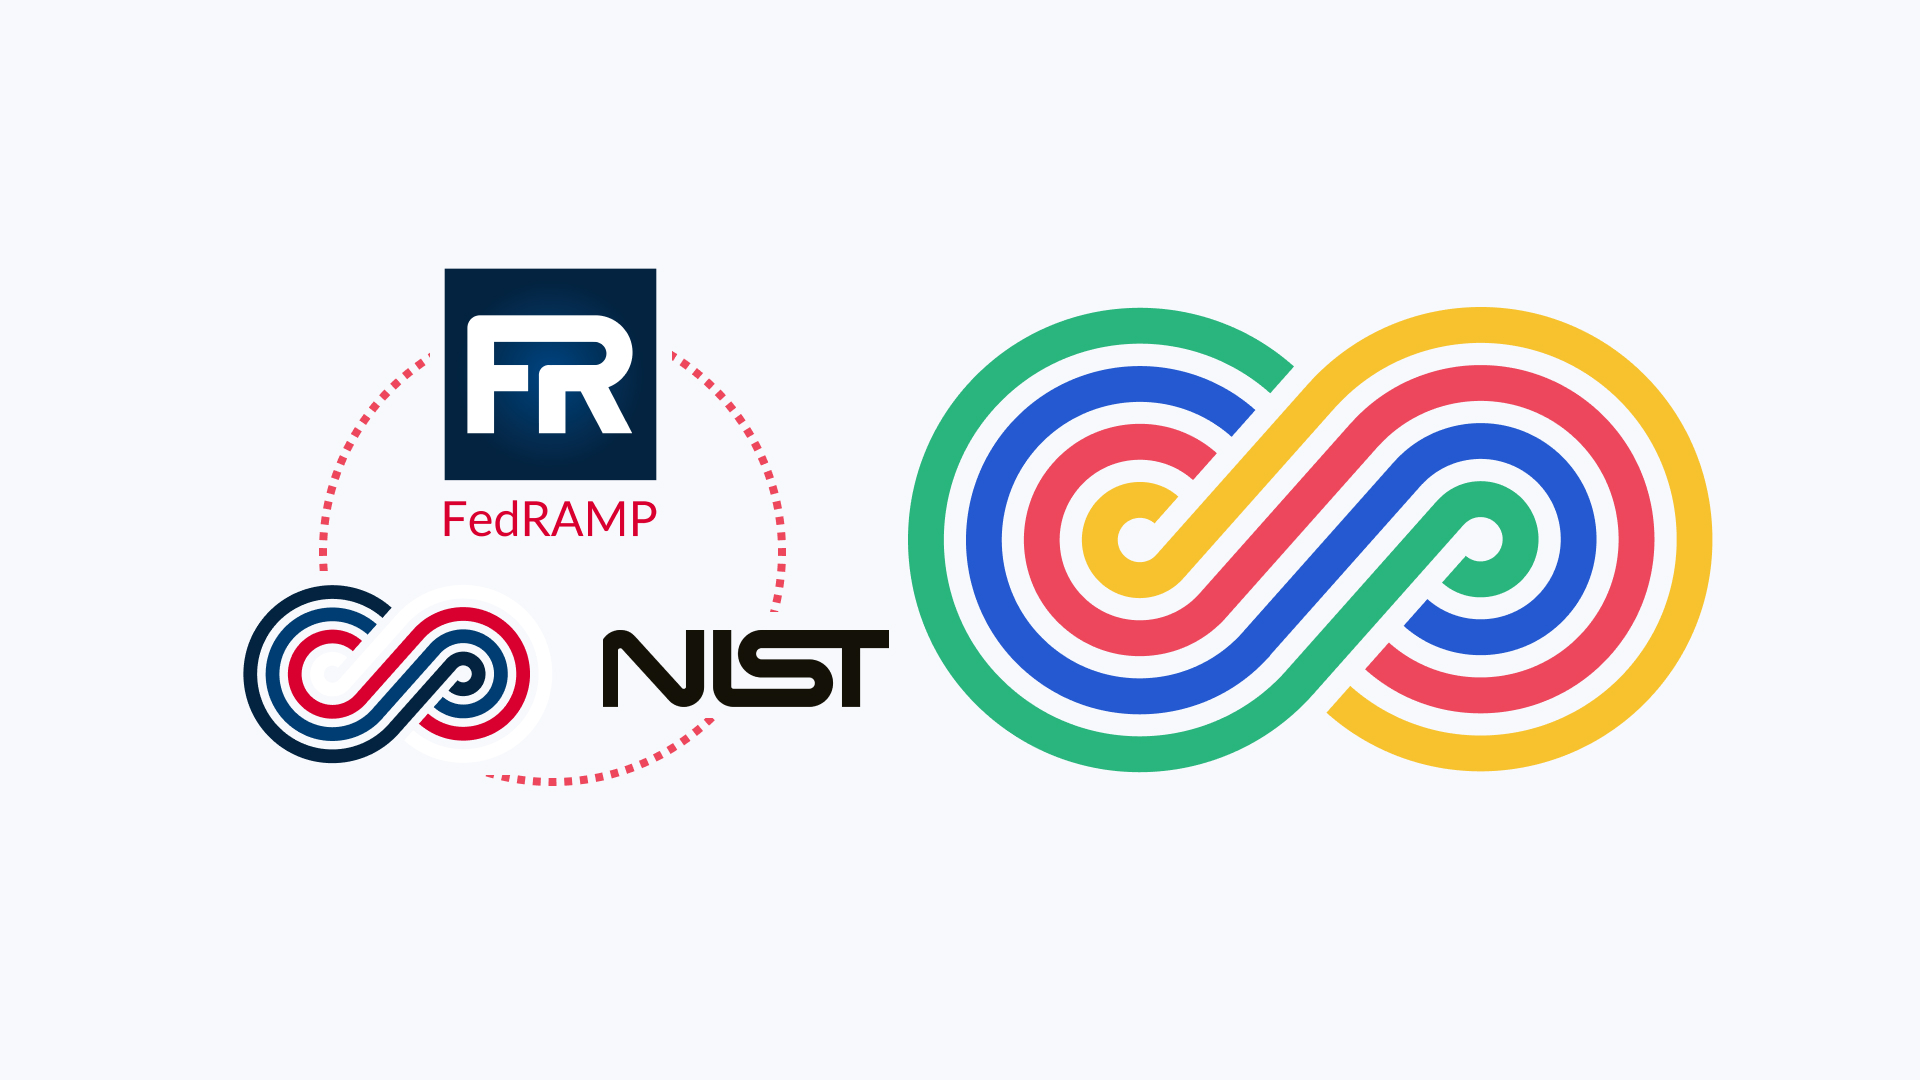 Continuous Compliance for FedRAMP and NIST: Continuous Compliance Loop, Nist logo, Fedramp logo